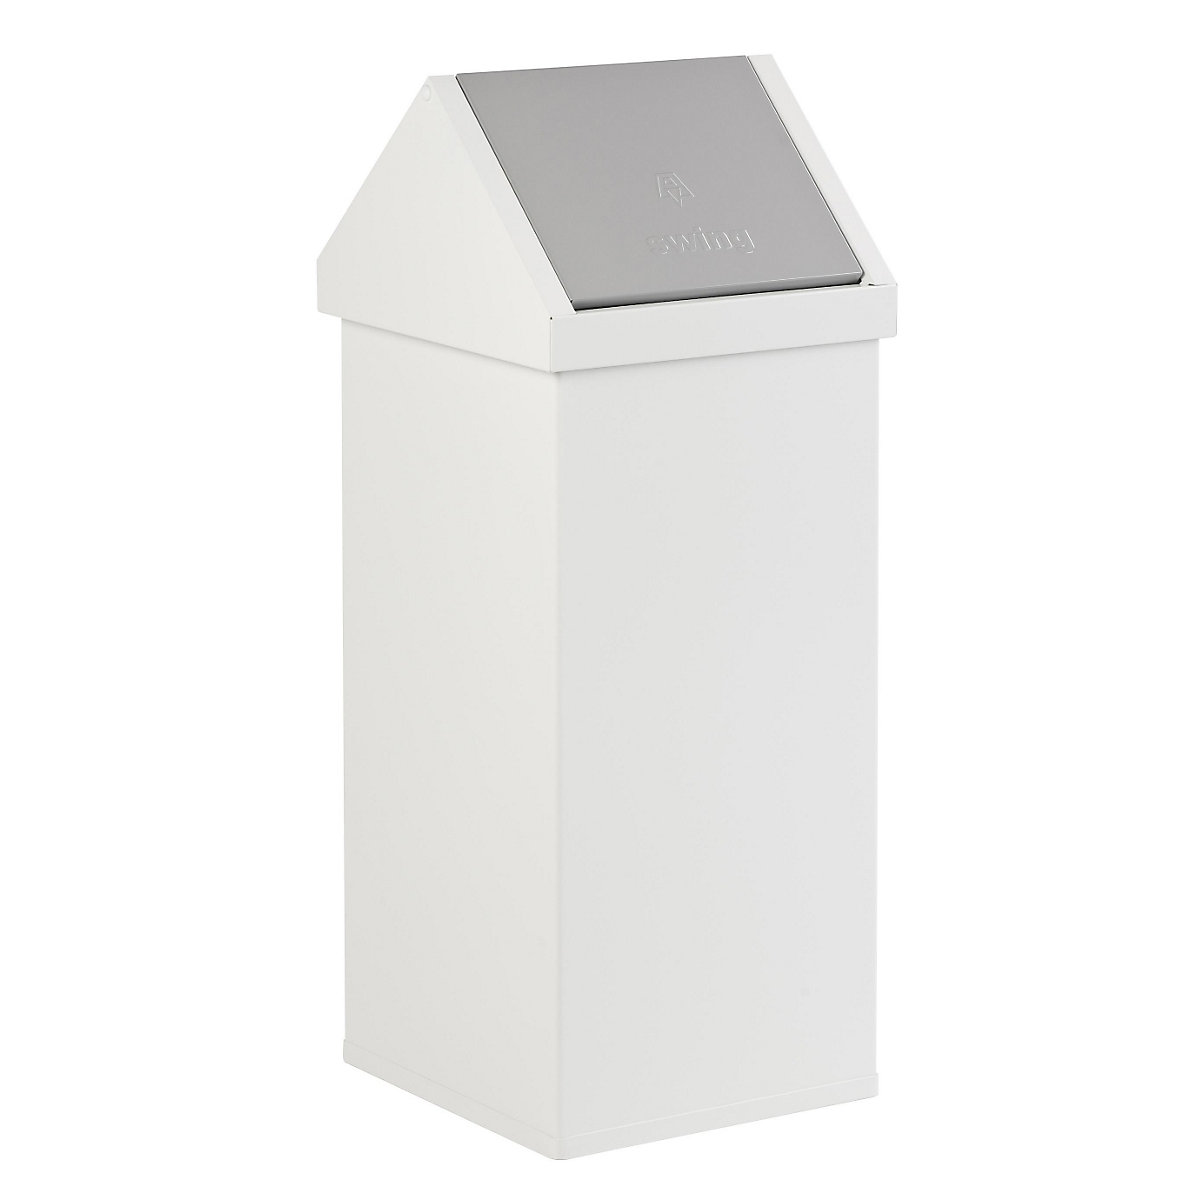 Waste collector with swing lid, capacity 110 l, WxHxD 360 x 1000 x 360 mm, aluminium, white-2